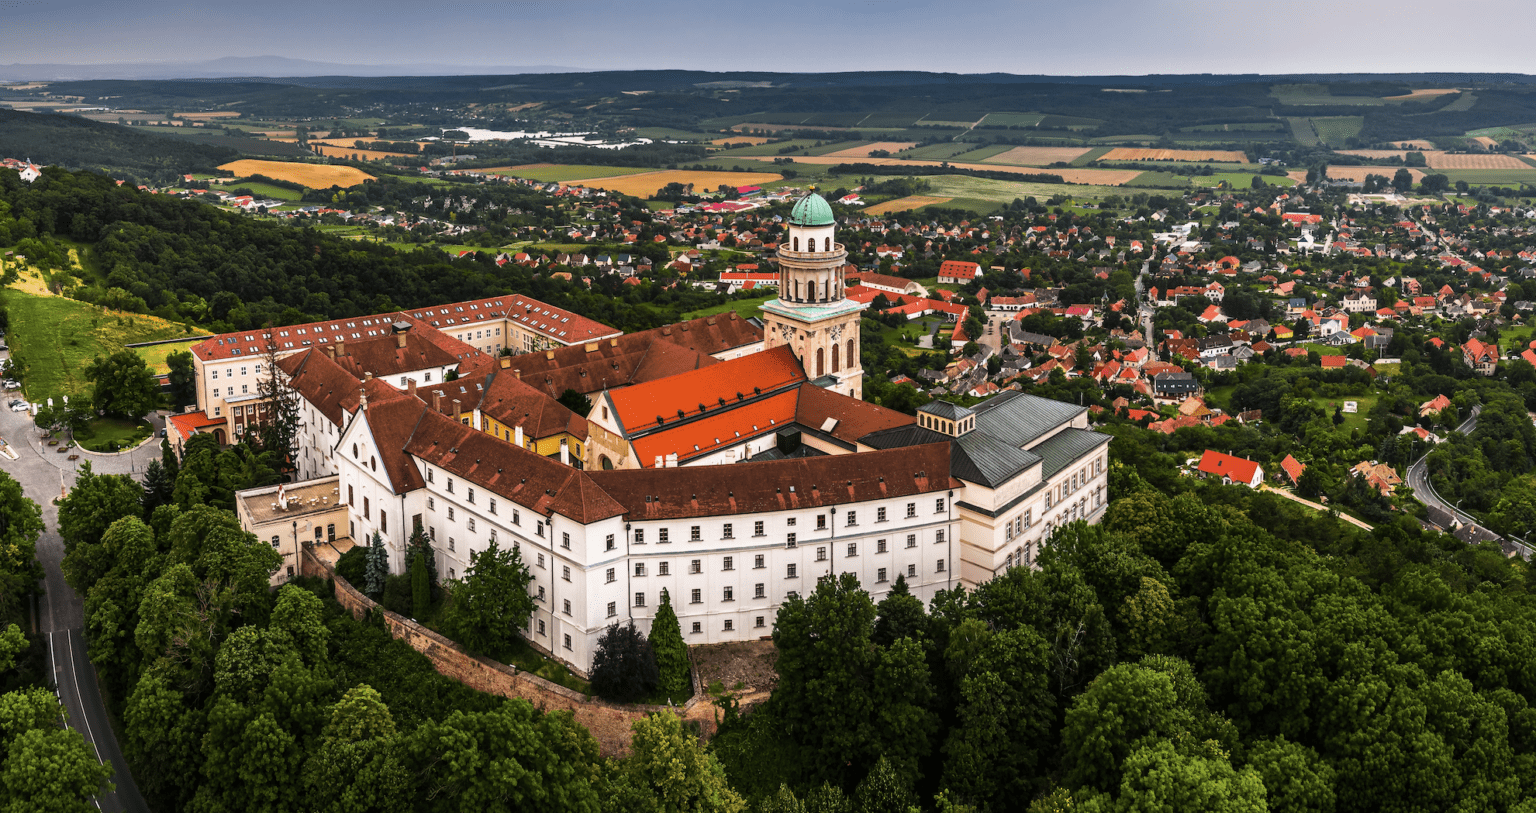 Pannonhalma, the Thousand-Year-Old Abbey